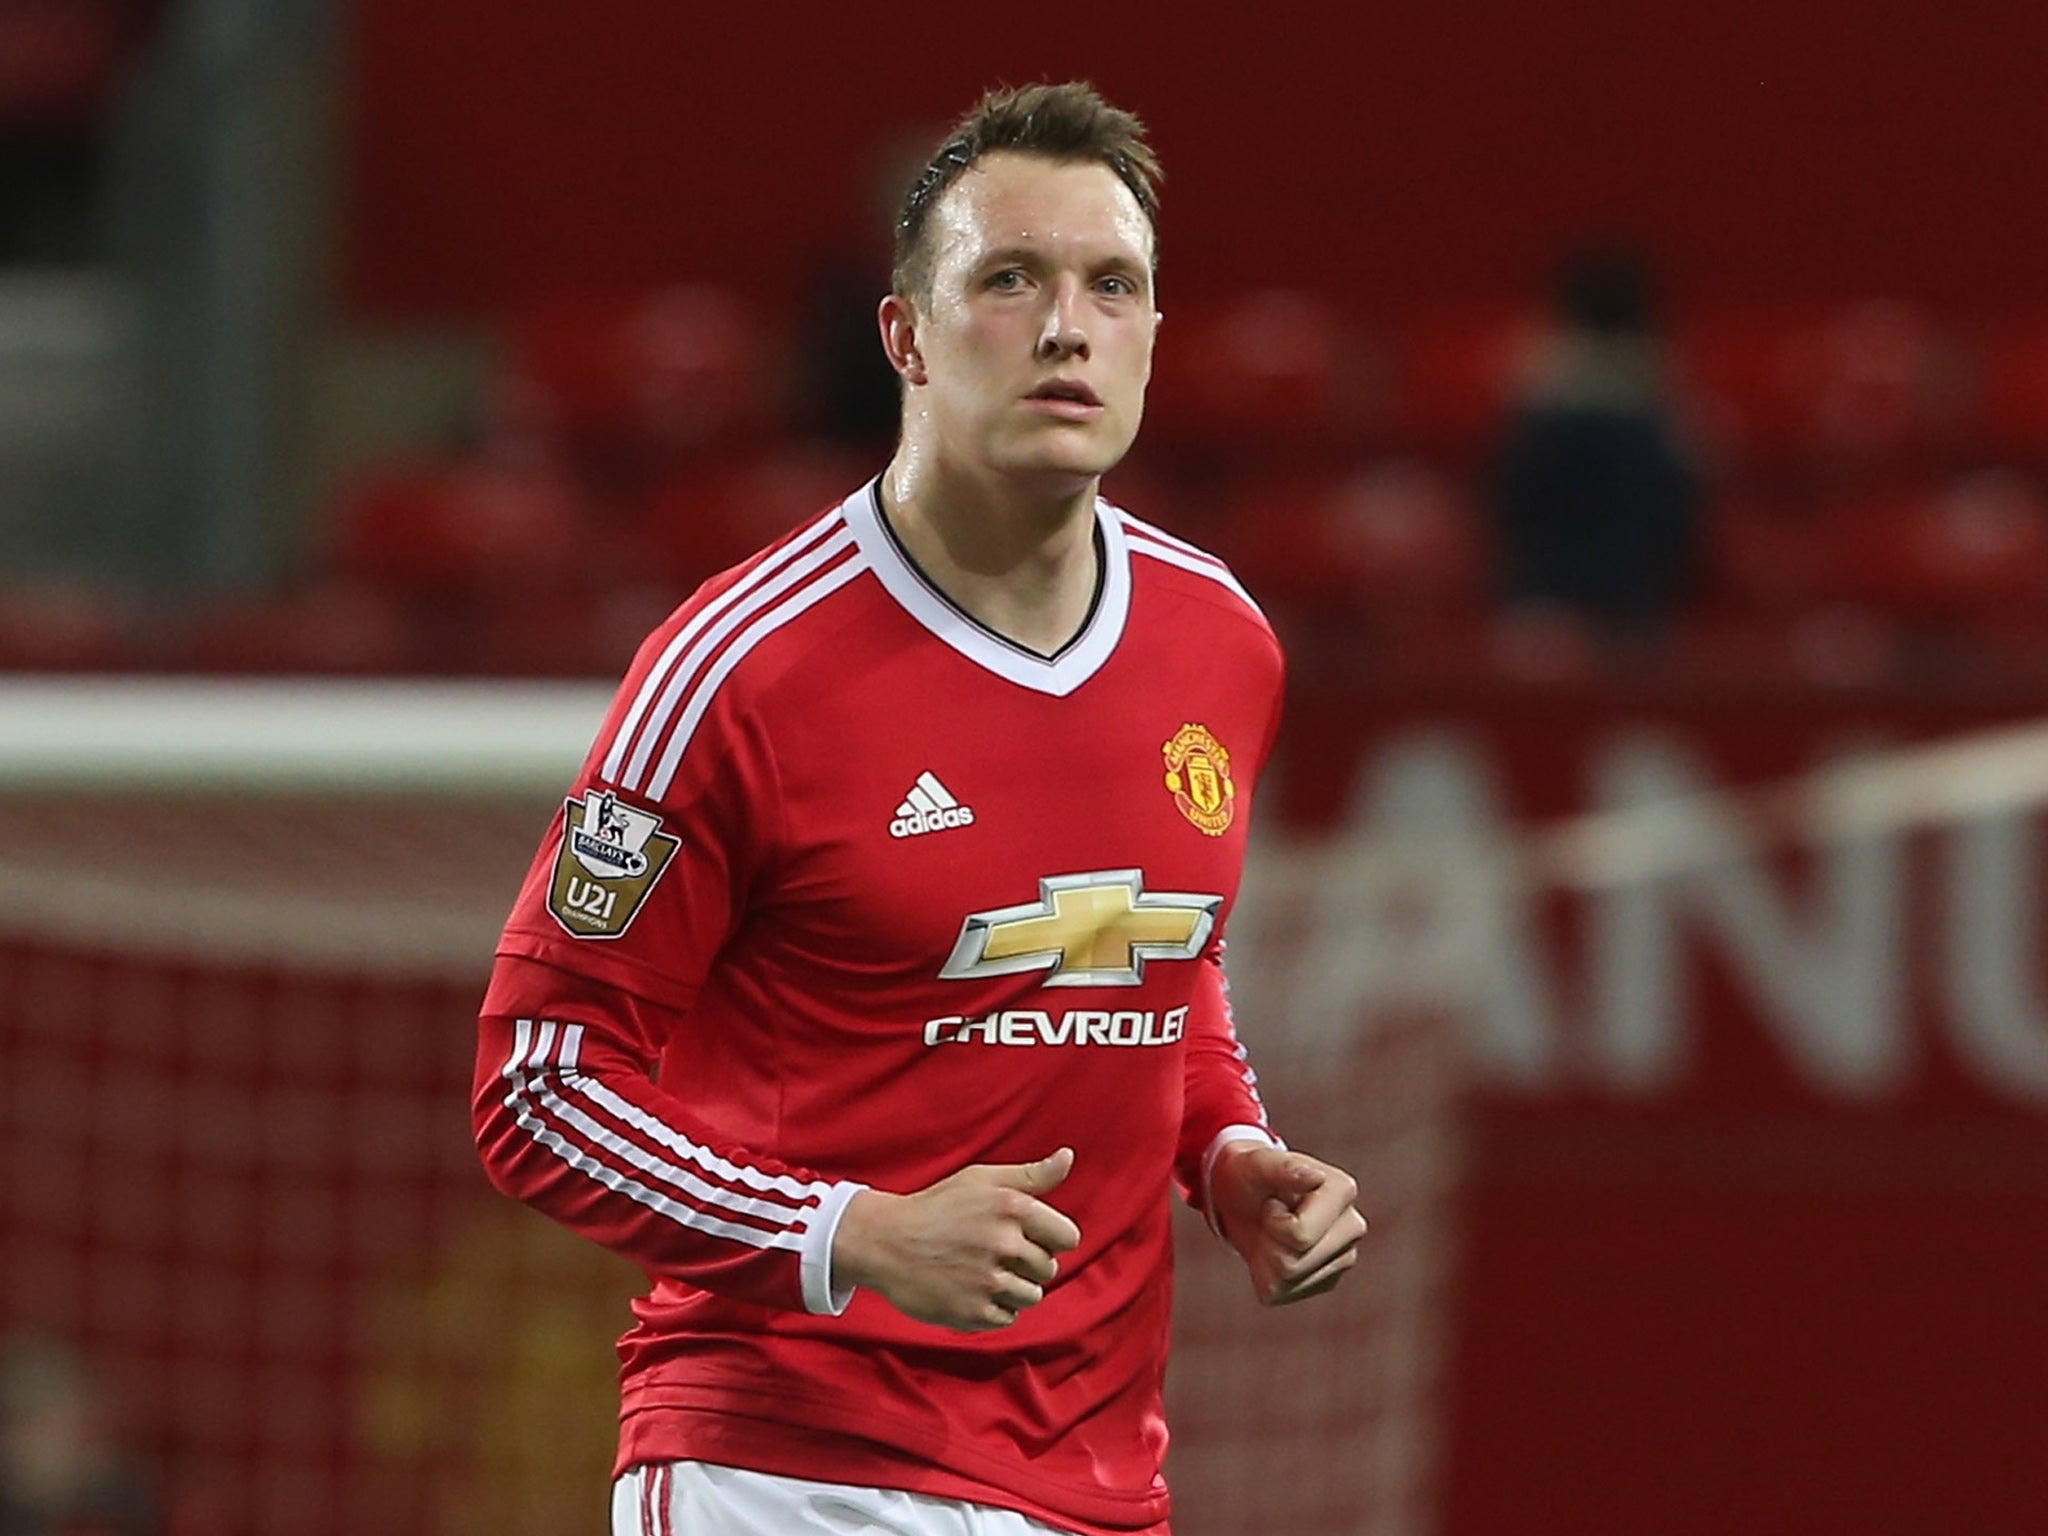 Jones has not featured for United's first-team since January 2